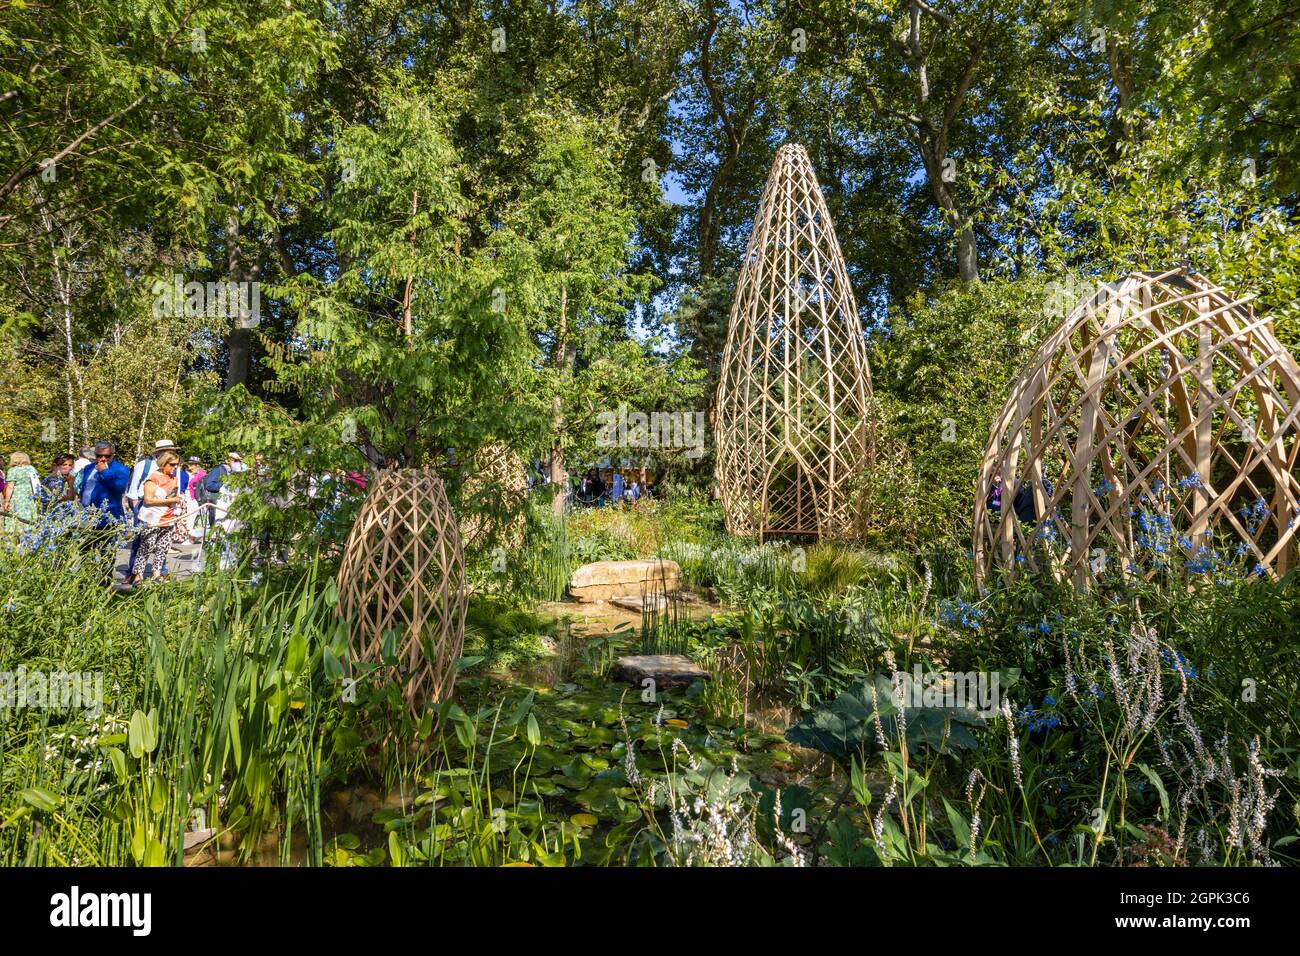 Best in Show Gold Medal winning Guangzhou Garden at RHS Chelsea Flower Show, held in the Royal Hospital Chelsea, London SW3 in September 2021 Stock Photo